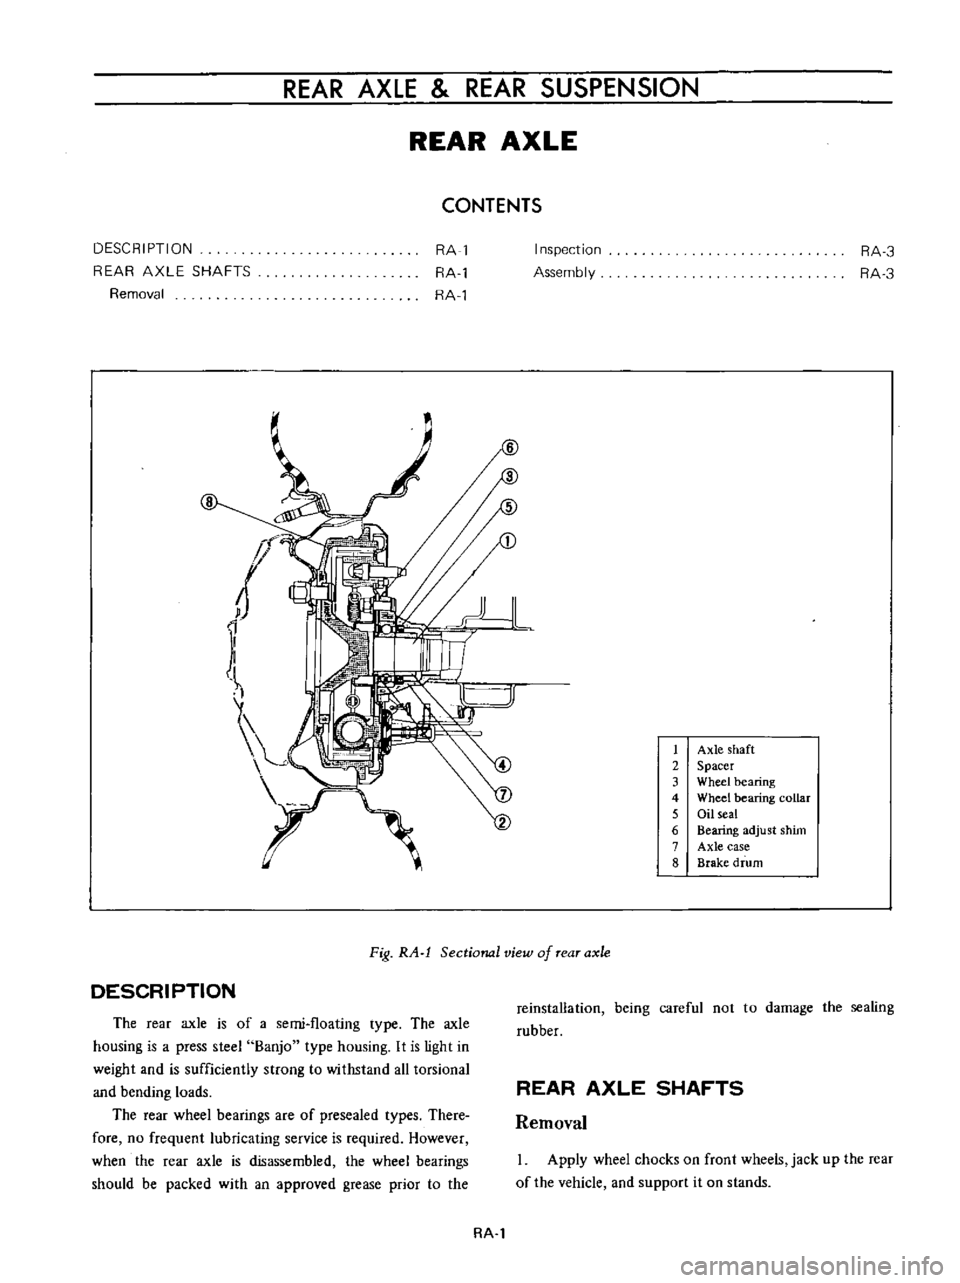 DATSUN B110 1973  Service User Guide 
REAR 
AXLE 
REAR

SUSPENSION

REAR 
AXLE

CONTENTS

DESCRIPTION

REAR 
AXLE 
SHAFTS

Removal 
RA 
1

RA 
l

RA 
l

8 
Inspection

Assembly 
RA 
3

RA

3

1 
Axle 
shaft

2

Spacer

3 
Wheel

bearing
